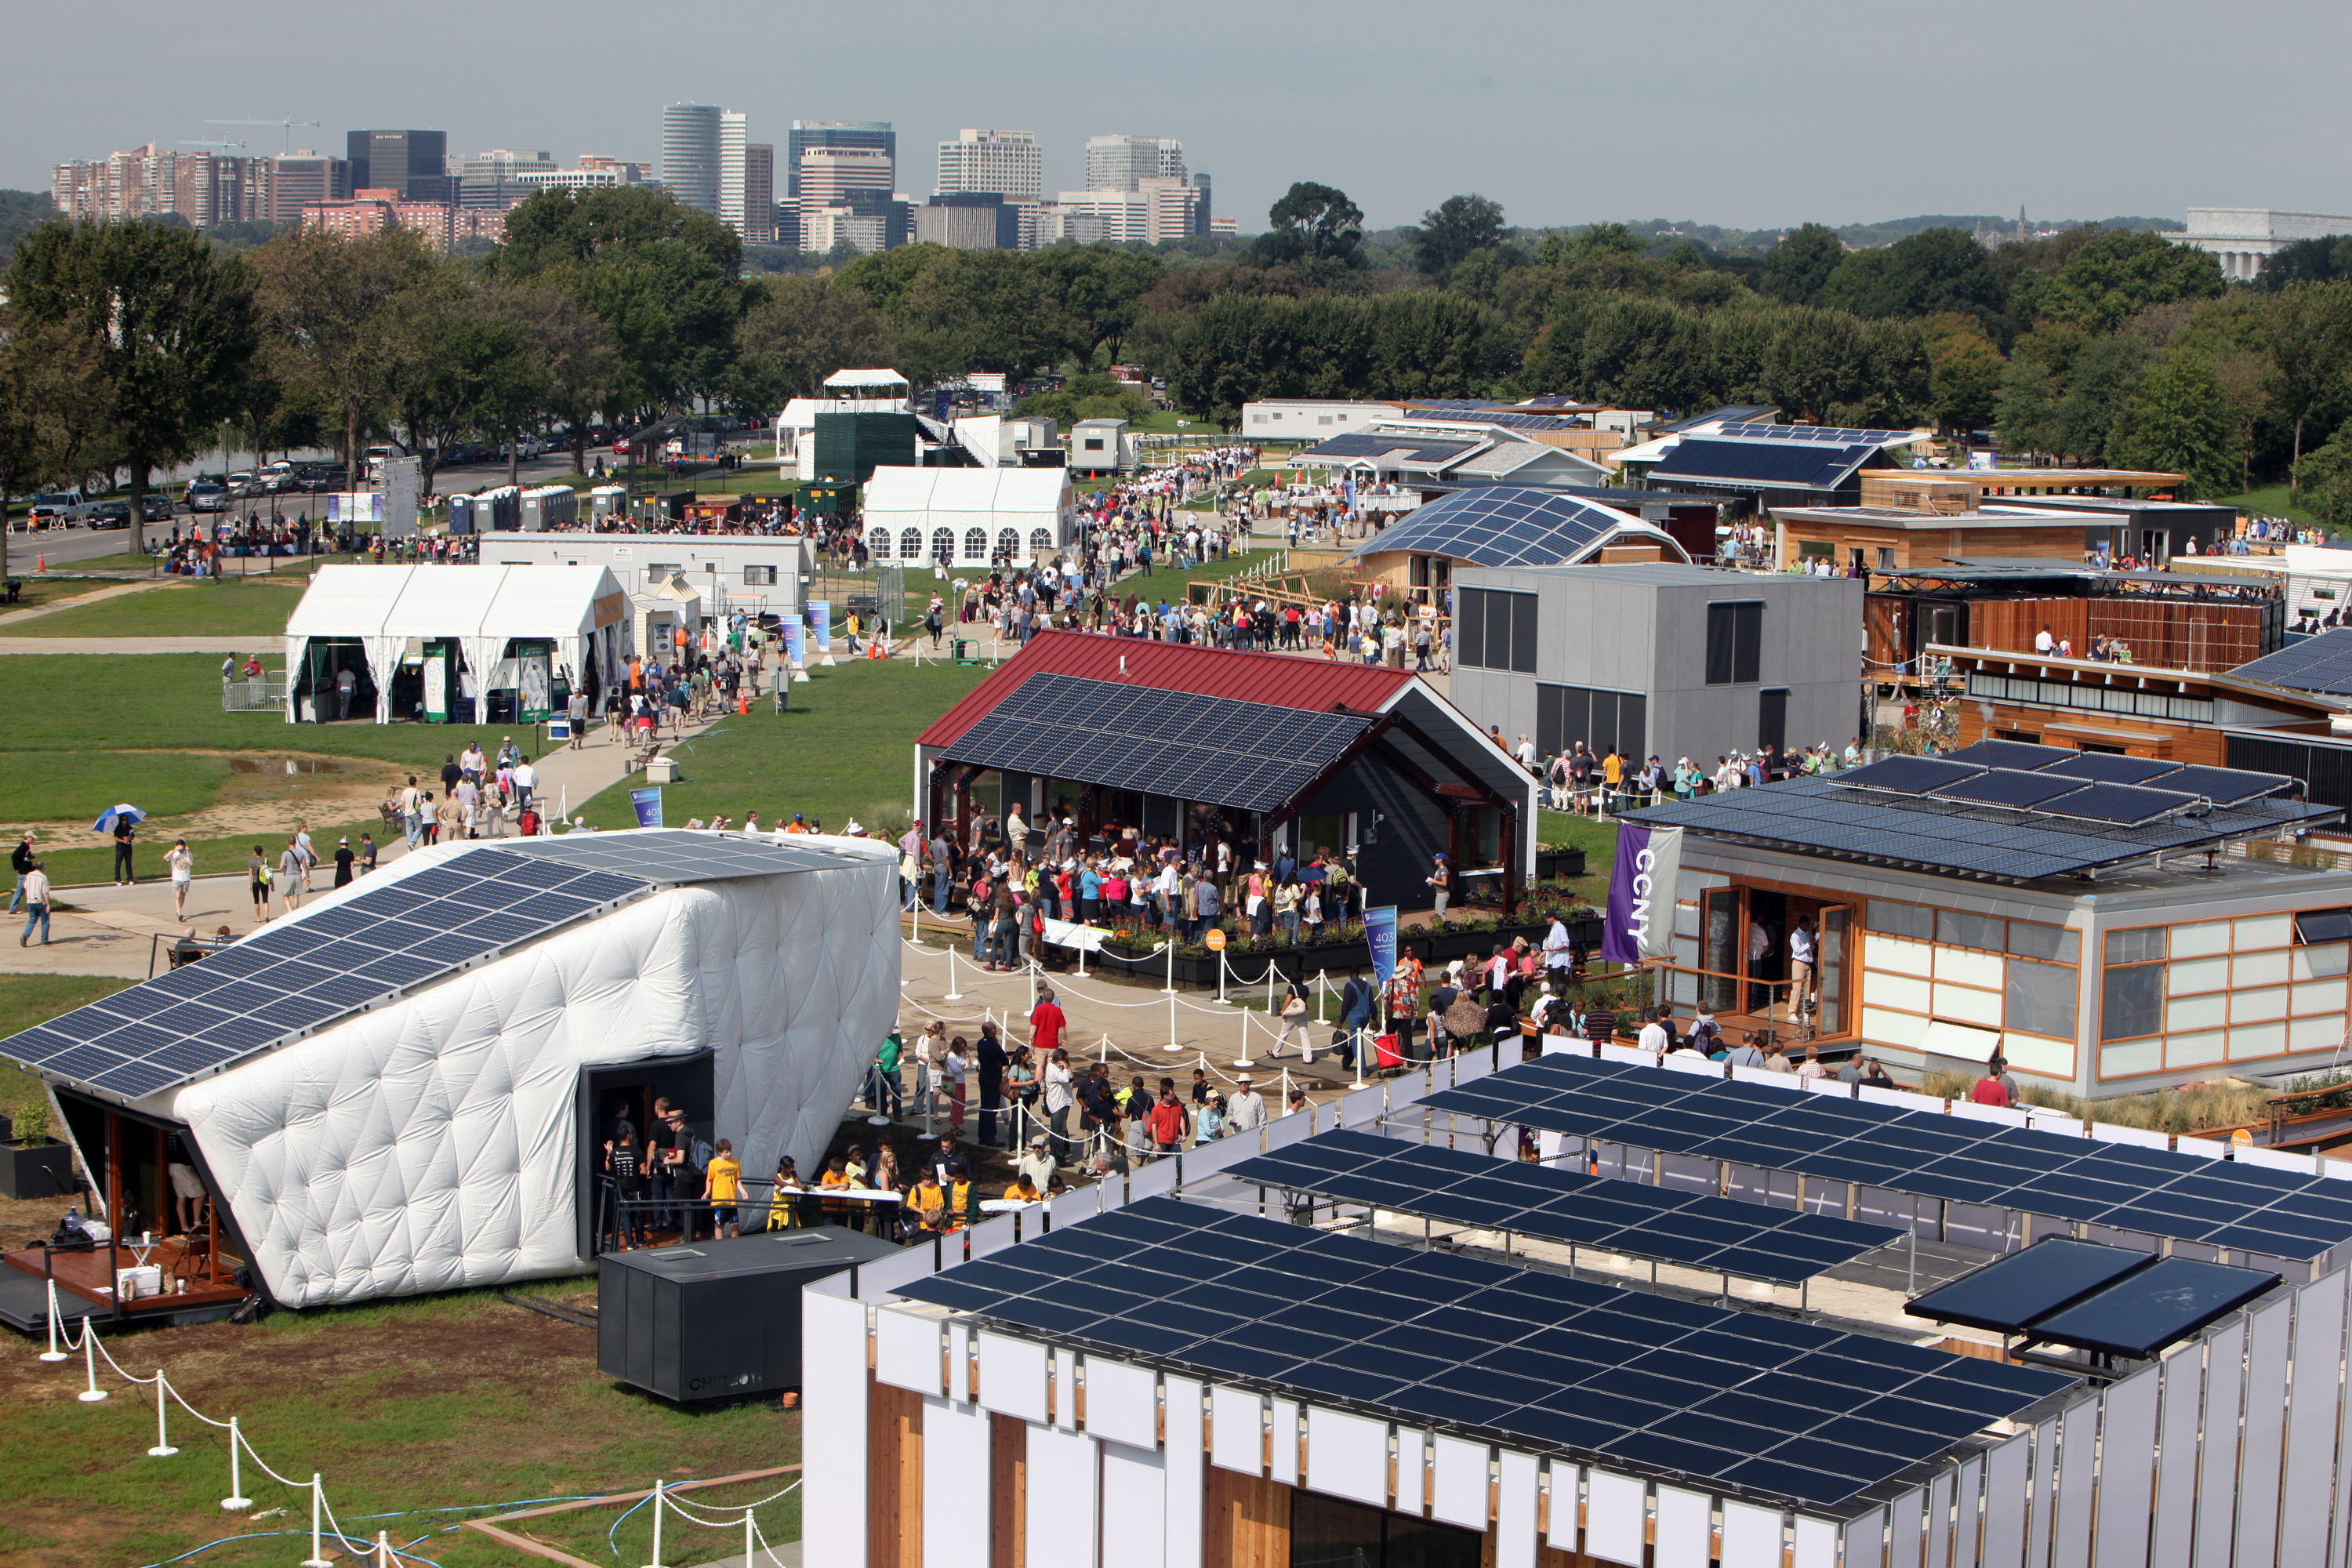 Solar Decathalon Houses Formed a "Solar Village" in Washington, D.C., Friday, Sept. 28, 2011.